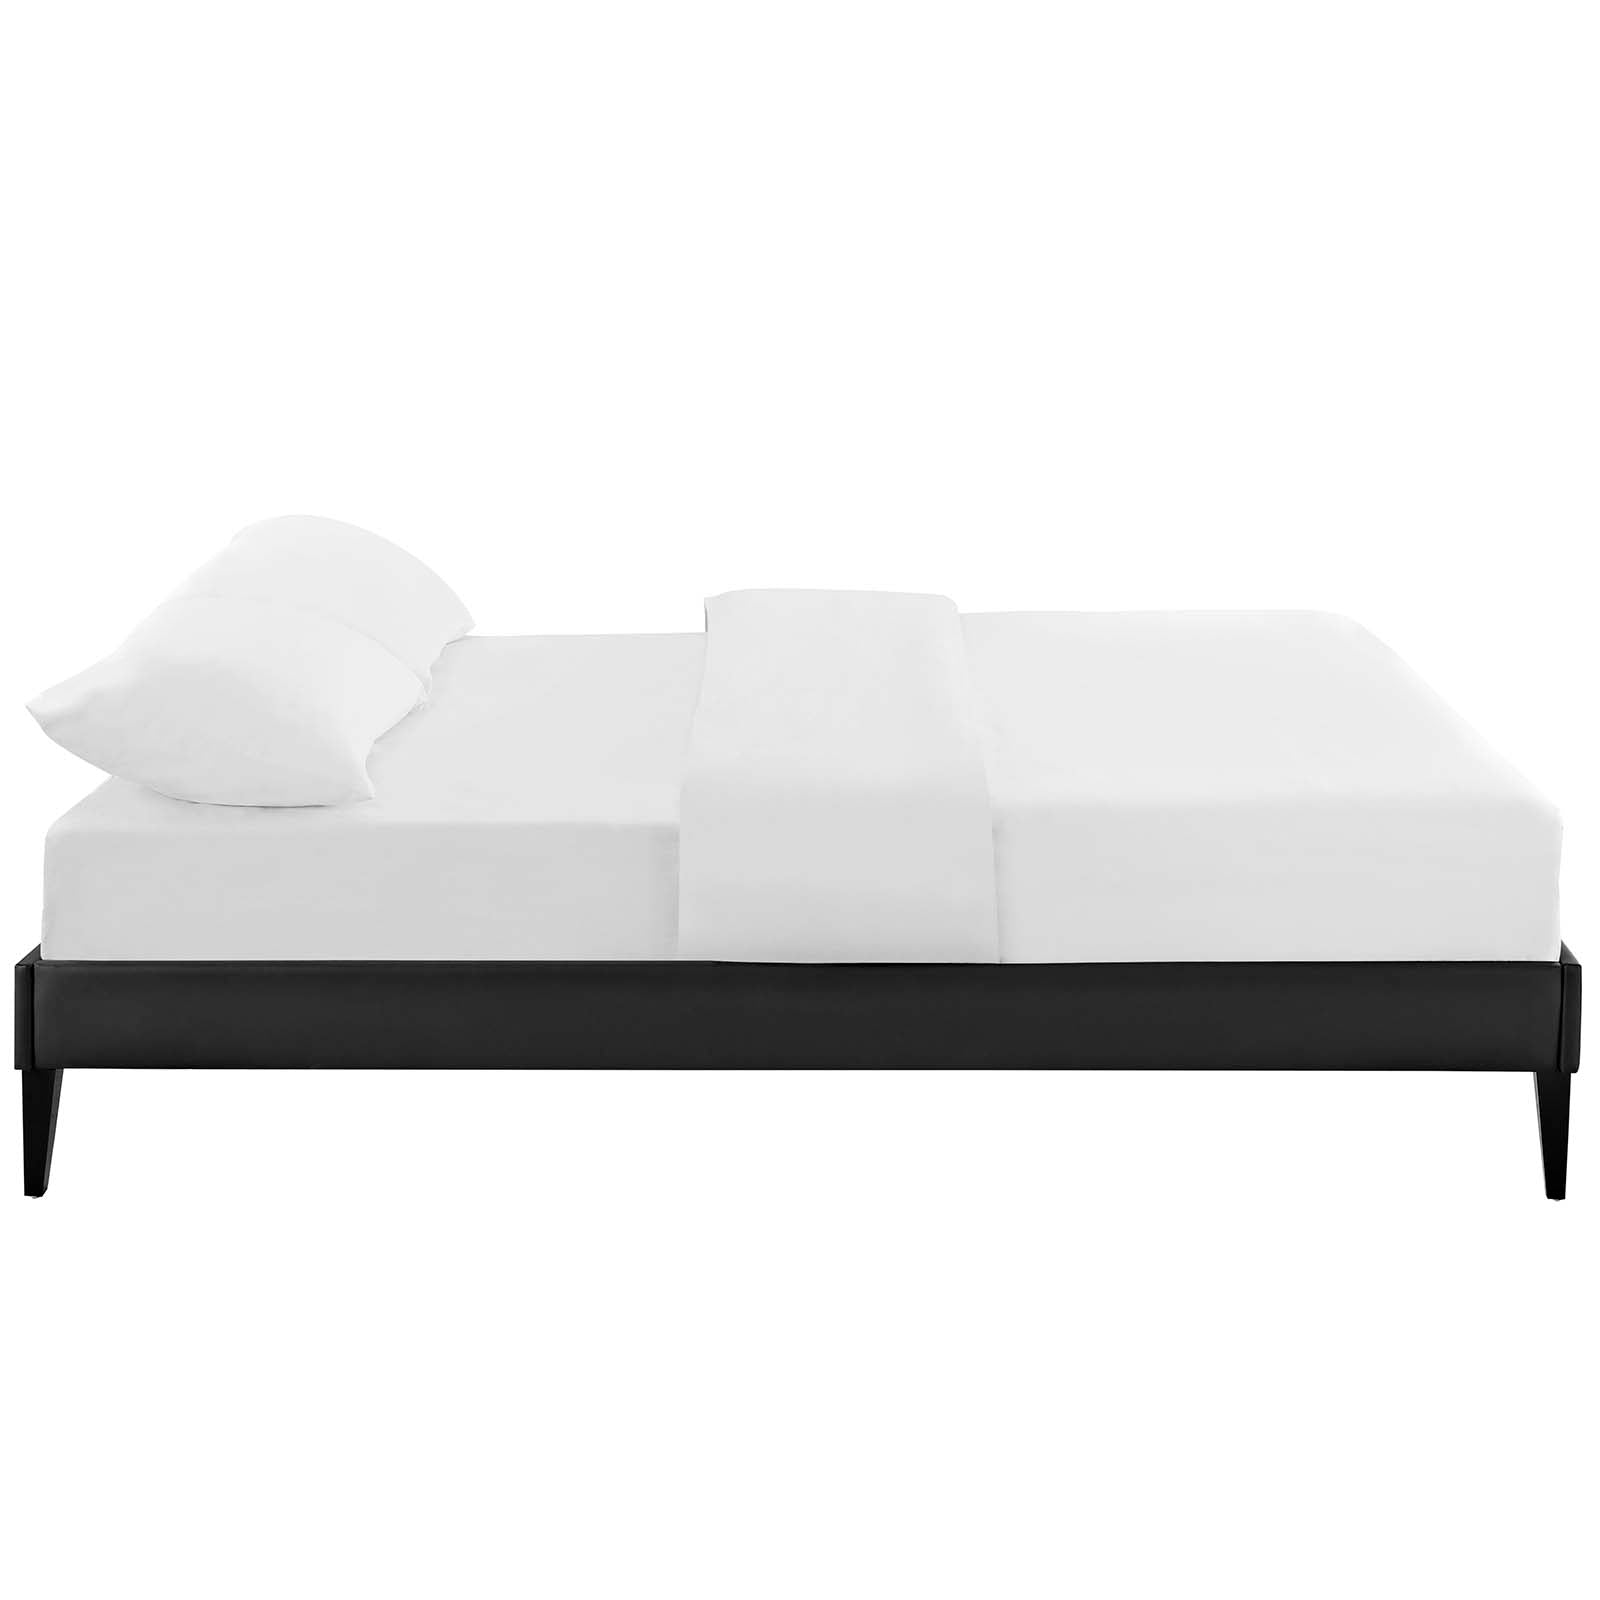 Tessie Full Vinyl Bed Frame with Squared Tapered Legs MOD-5896 Black